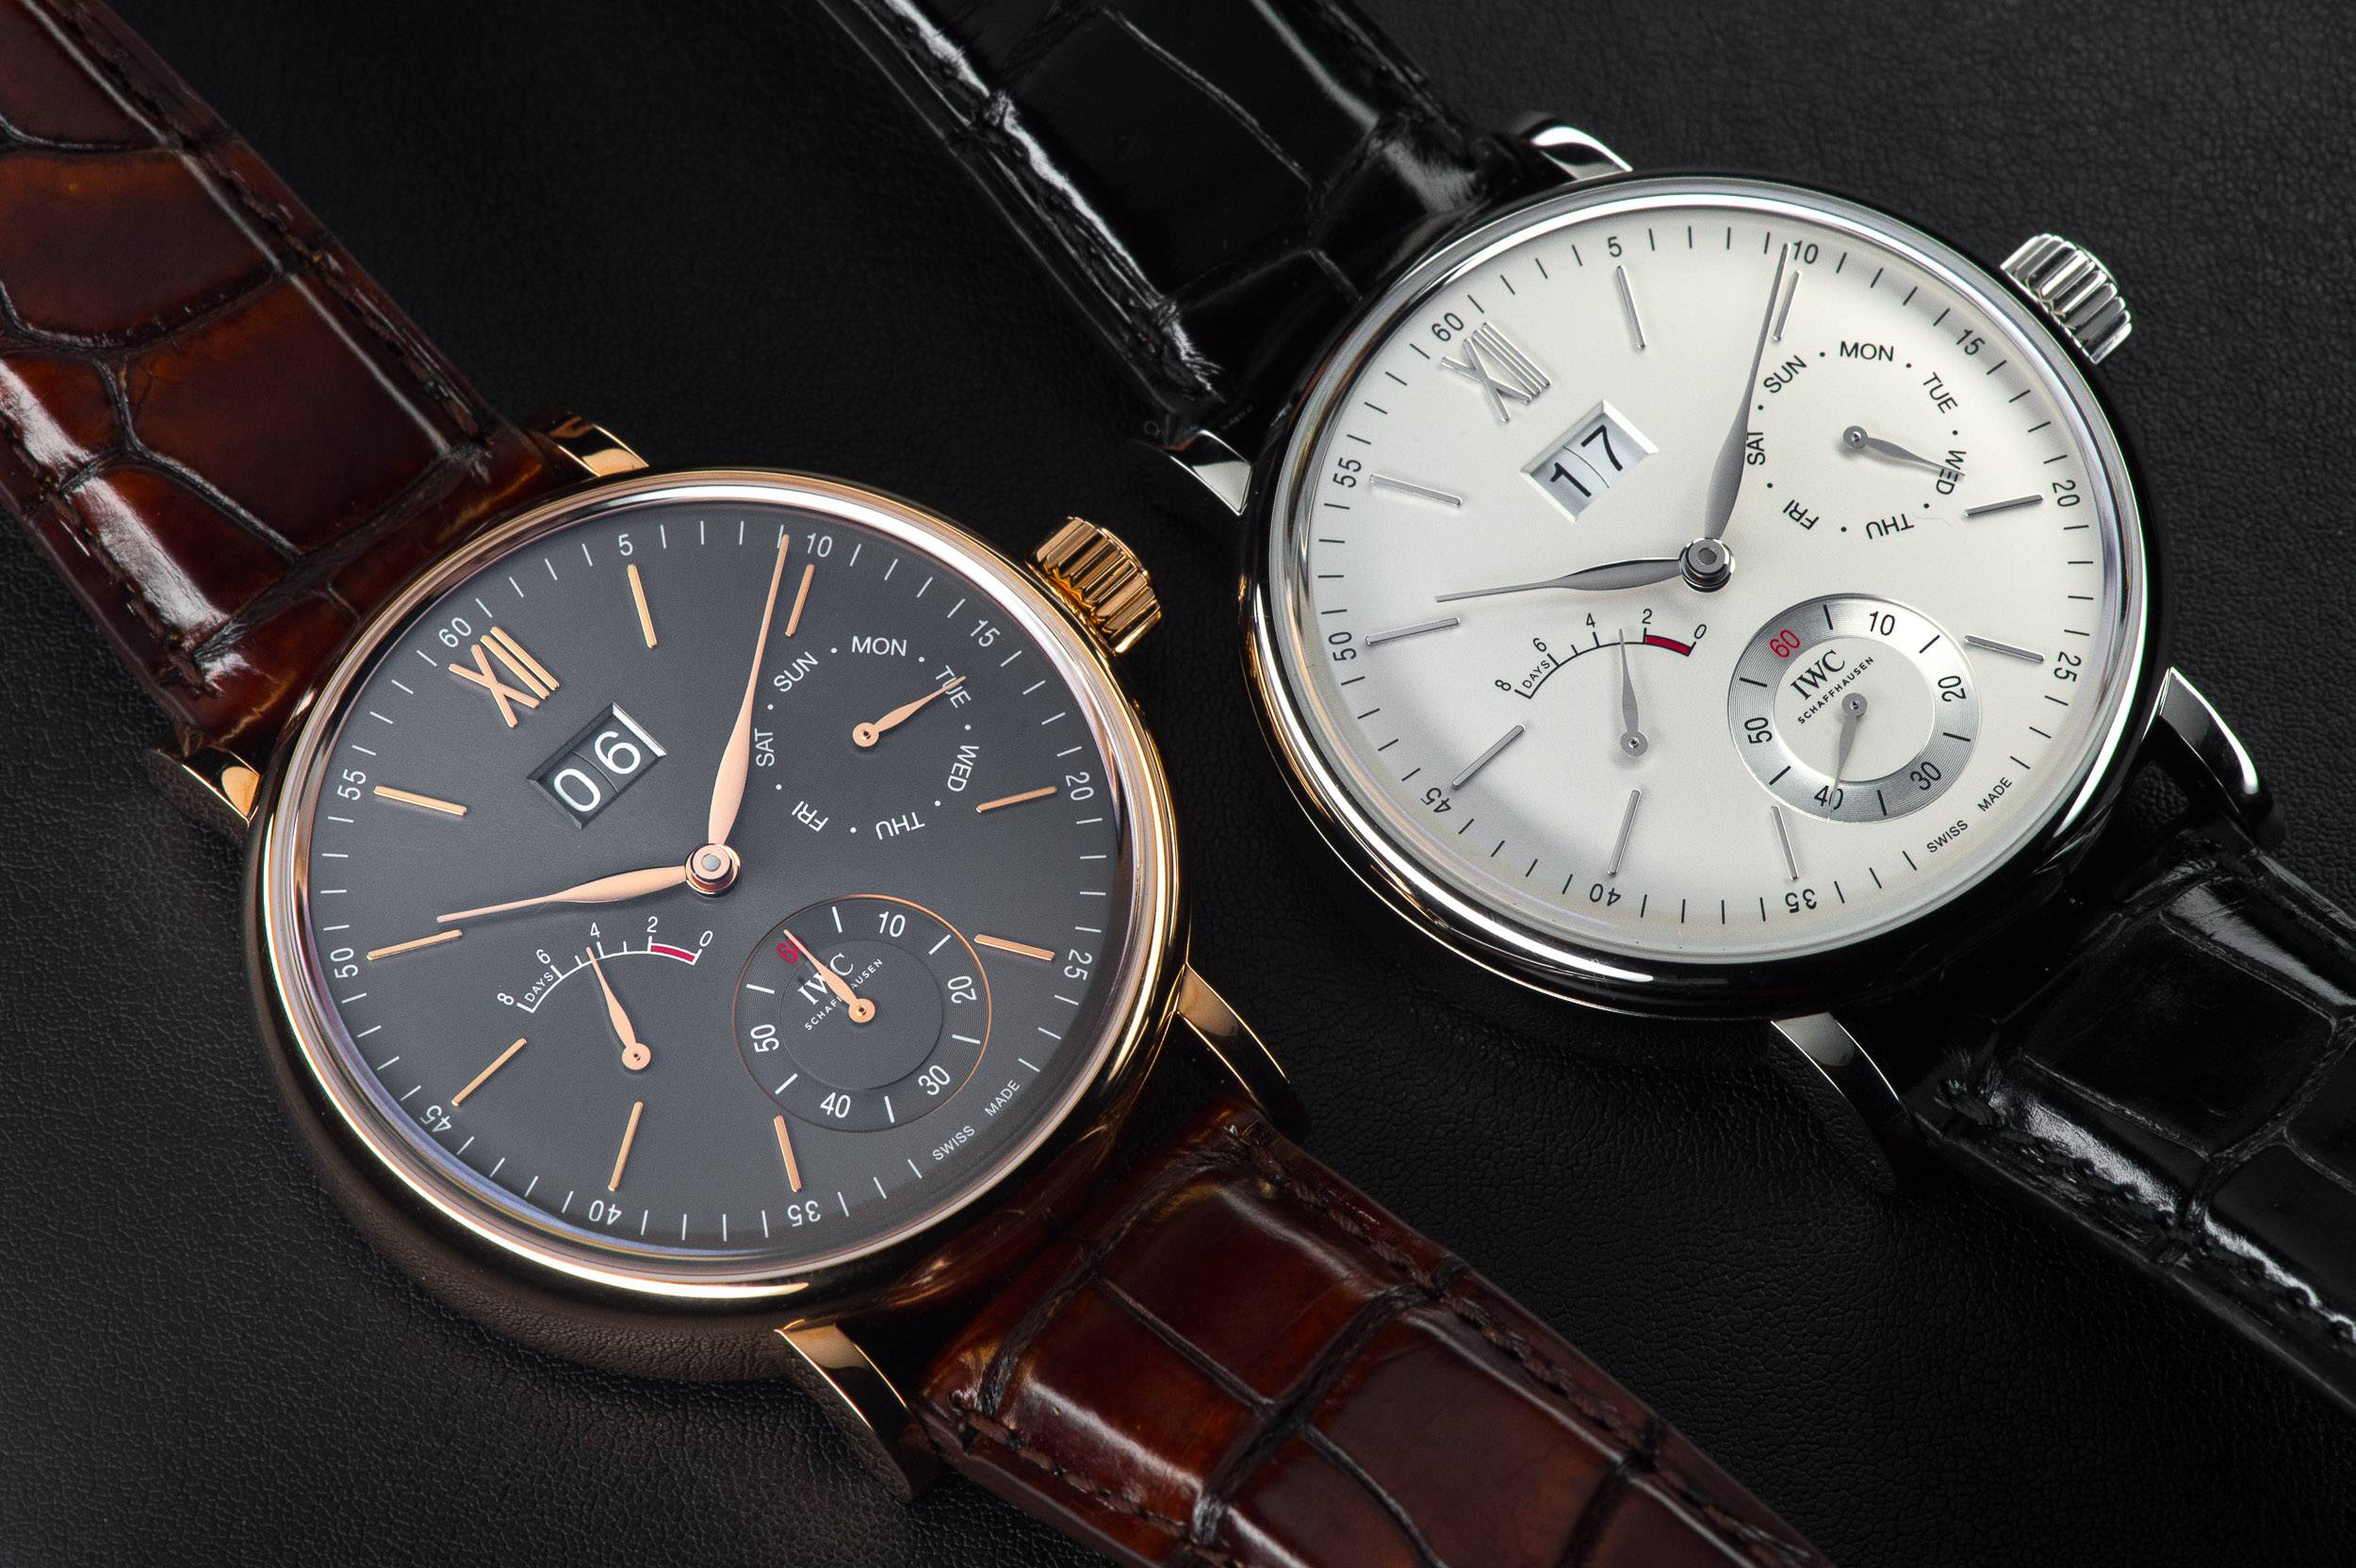 Introducing The IWC Portofino Hand-Wound Day & Date (Live Pictures From Watches & Wonders 2015)